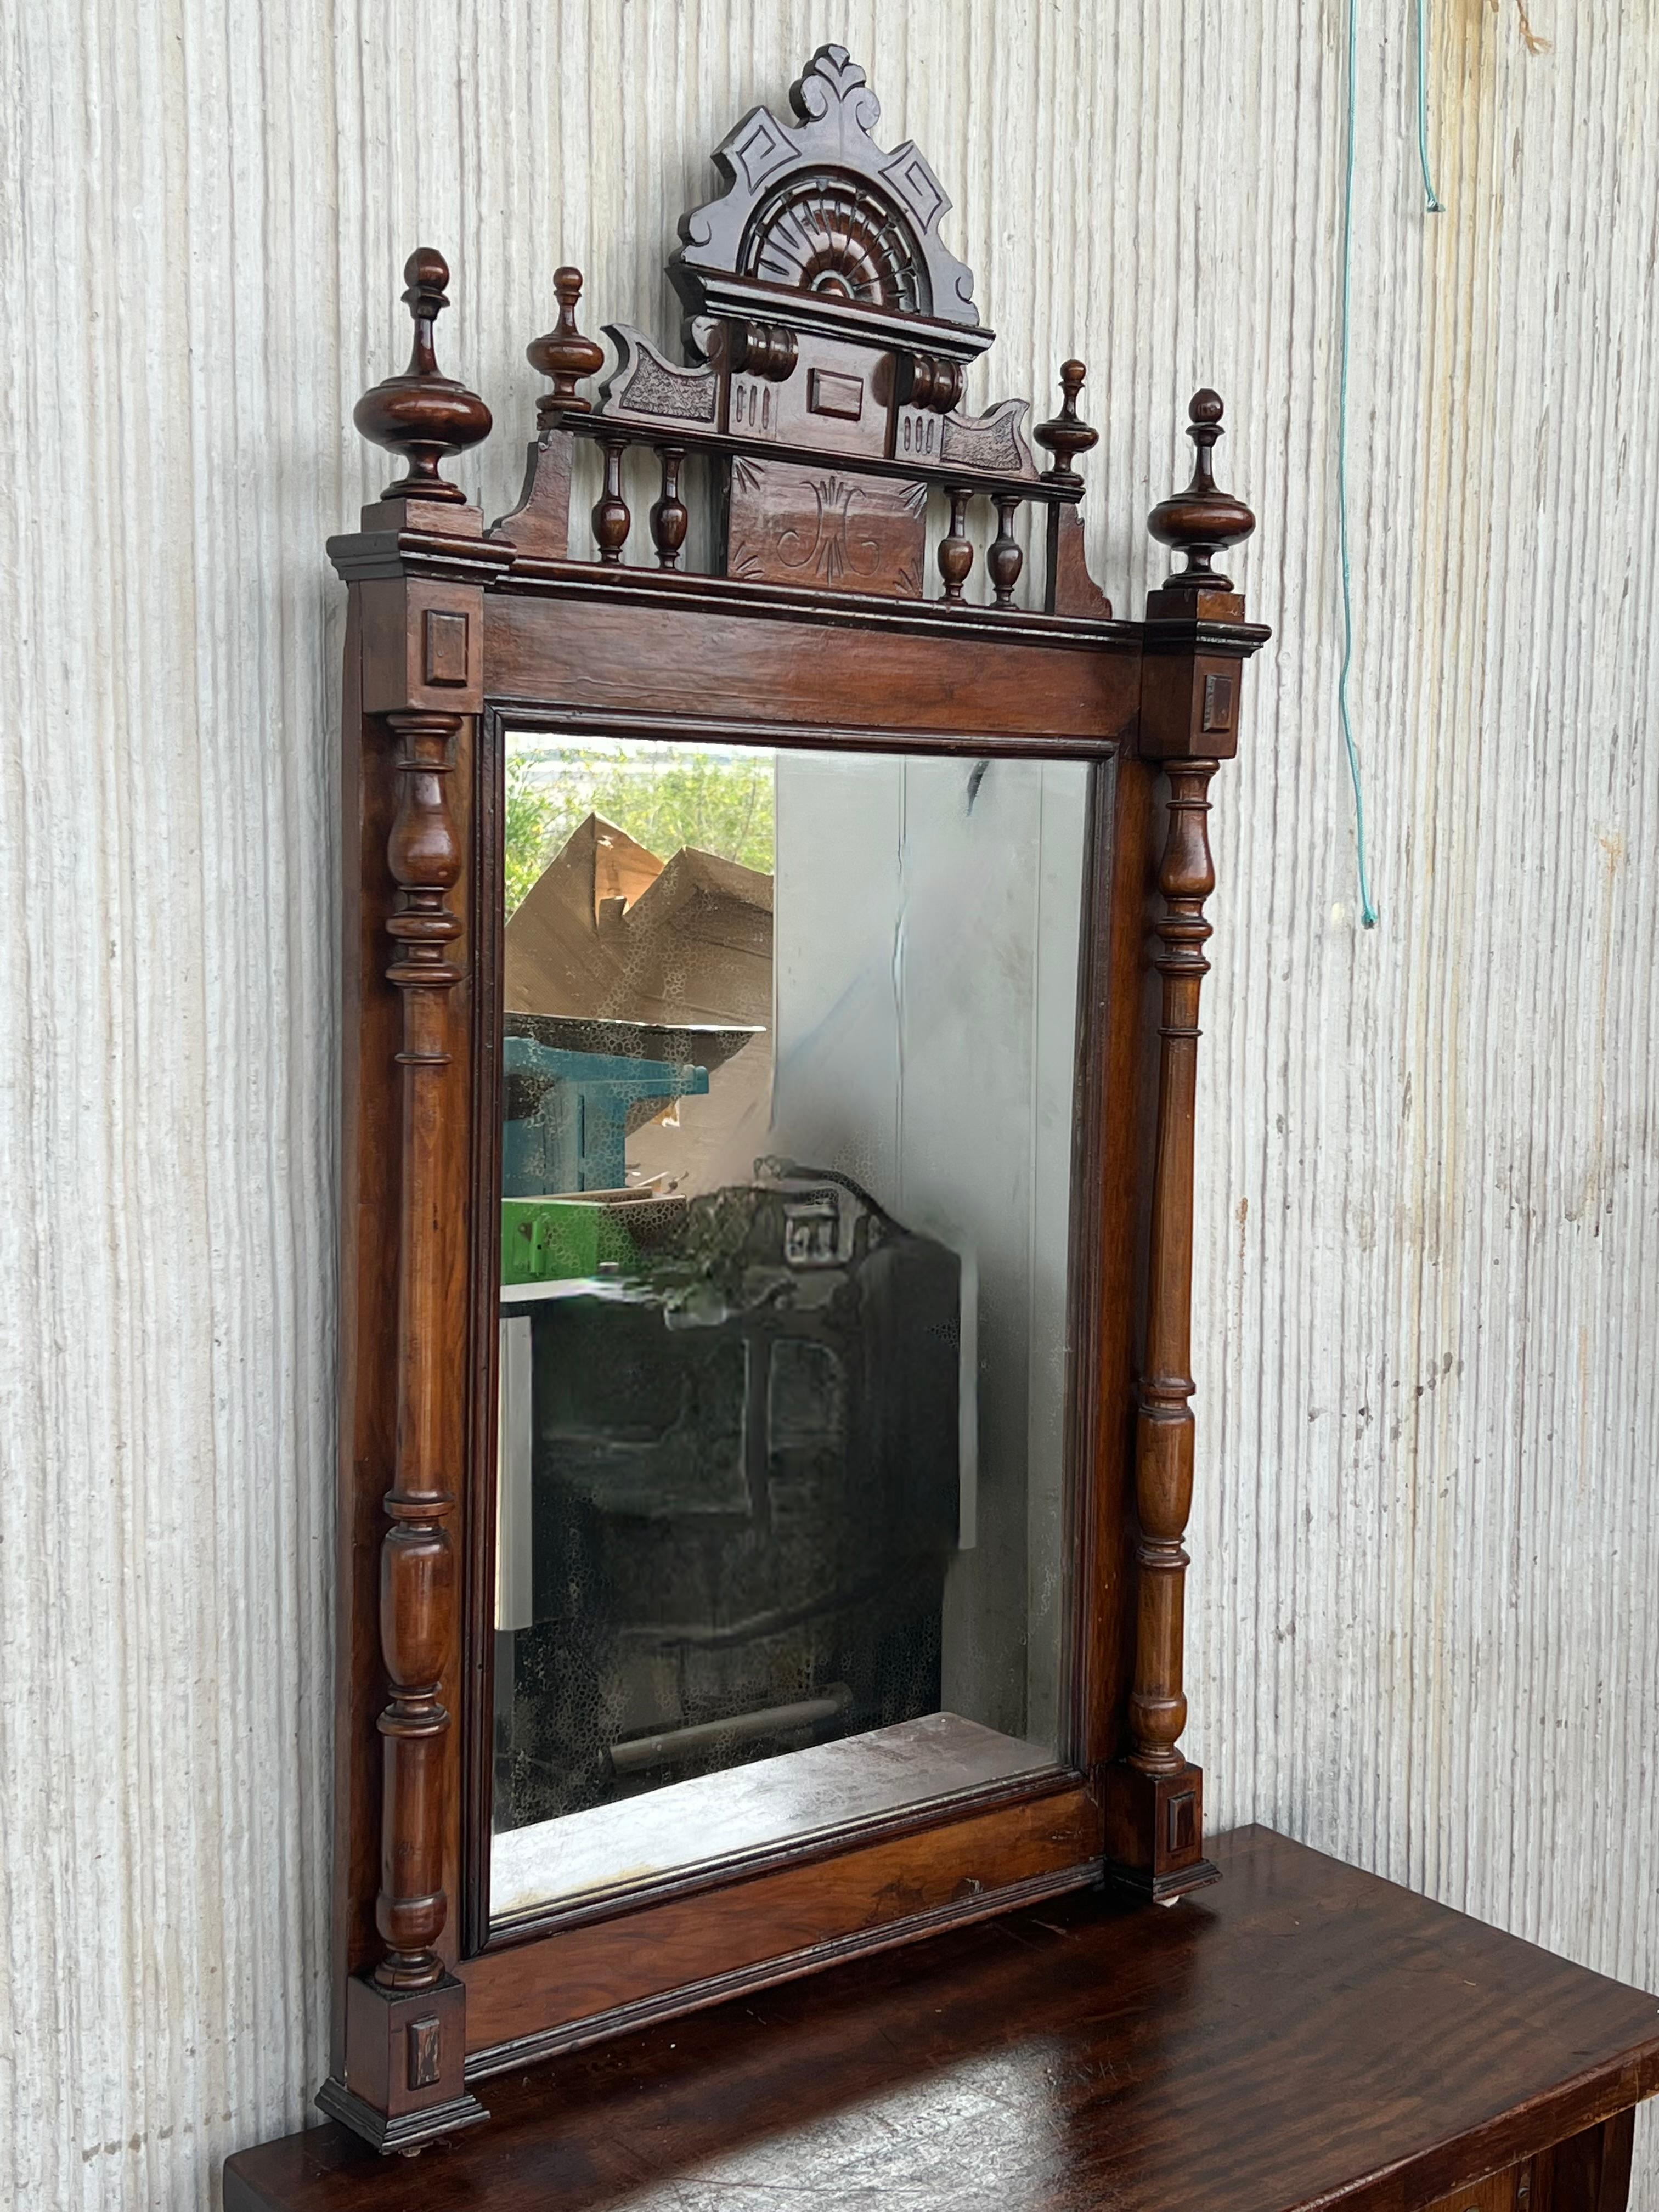 Early 20th French ebonized mirror with turned columns and high carved details.